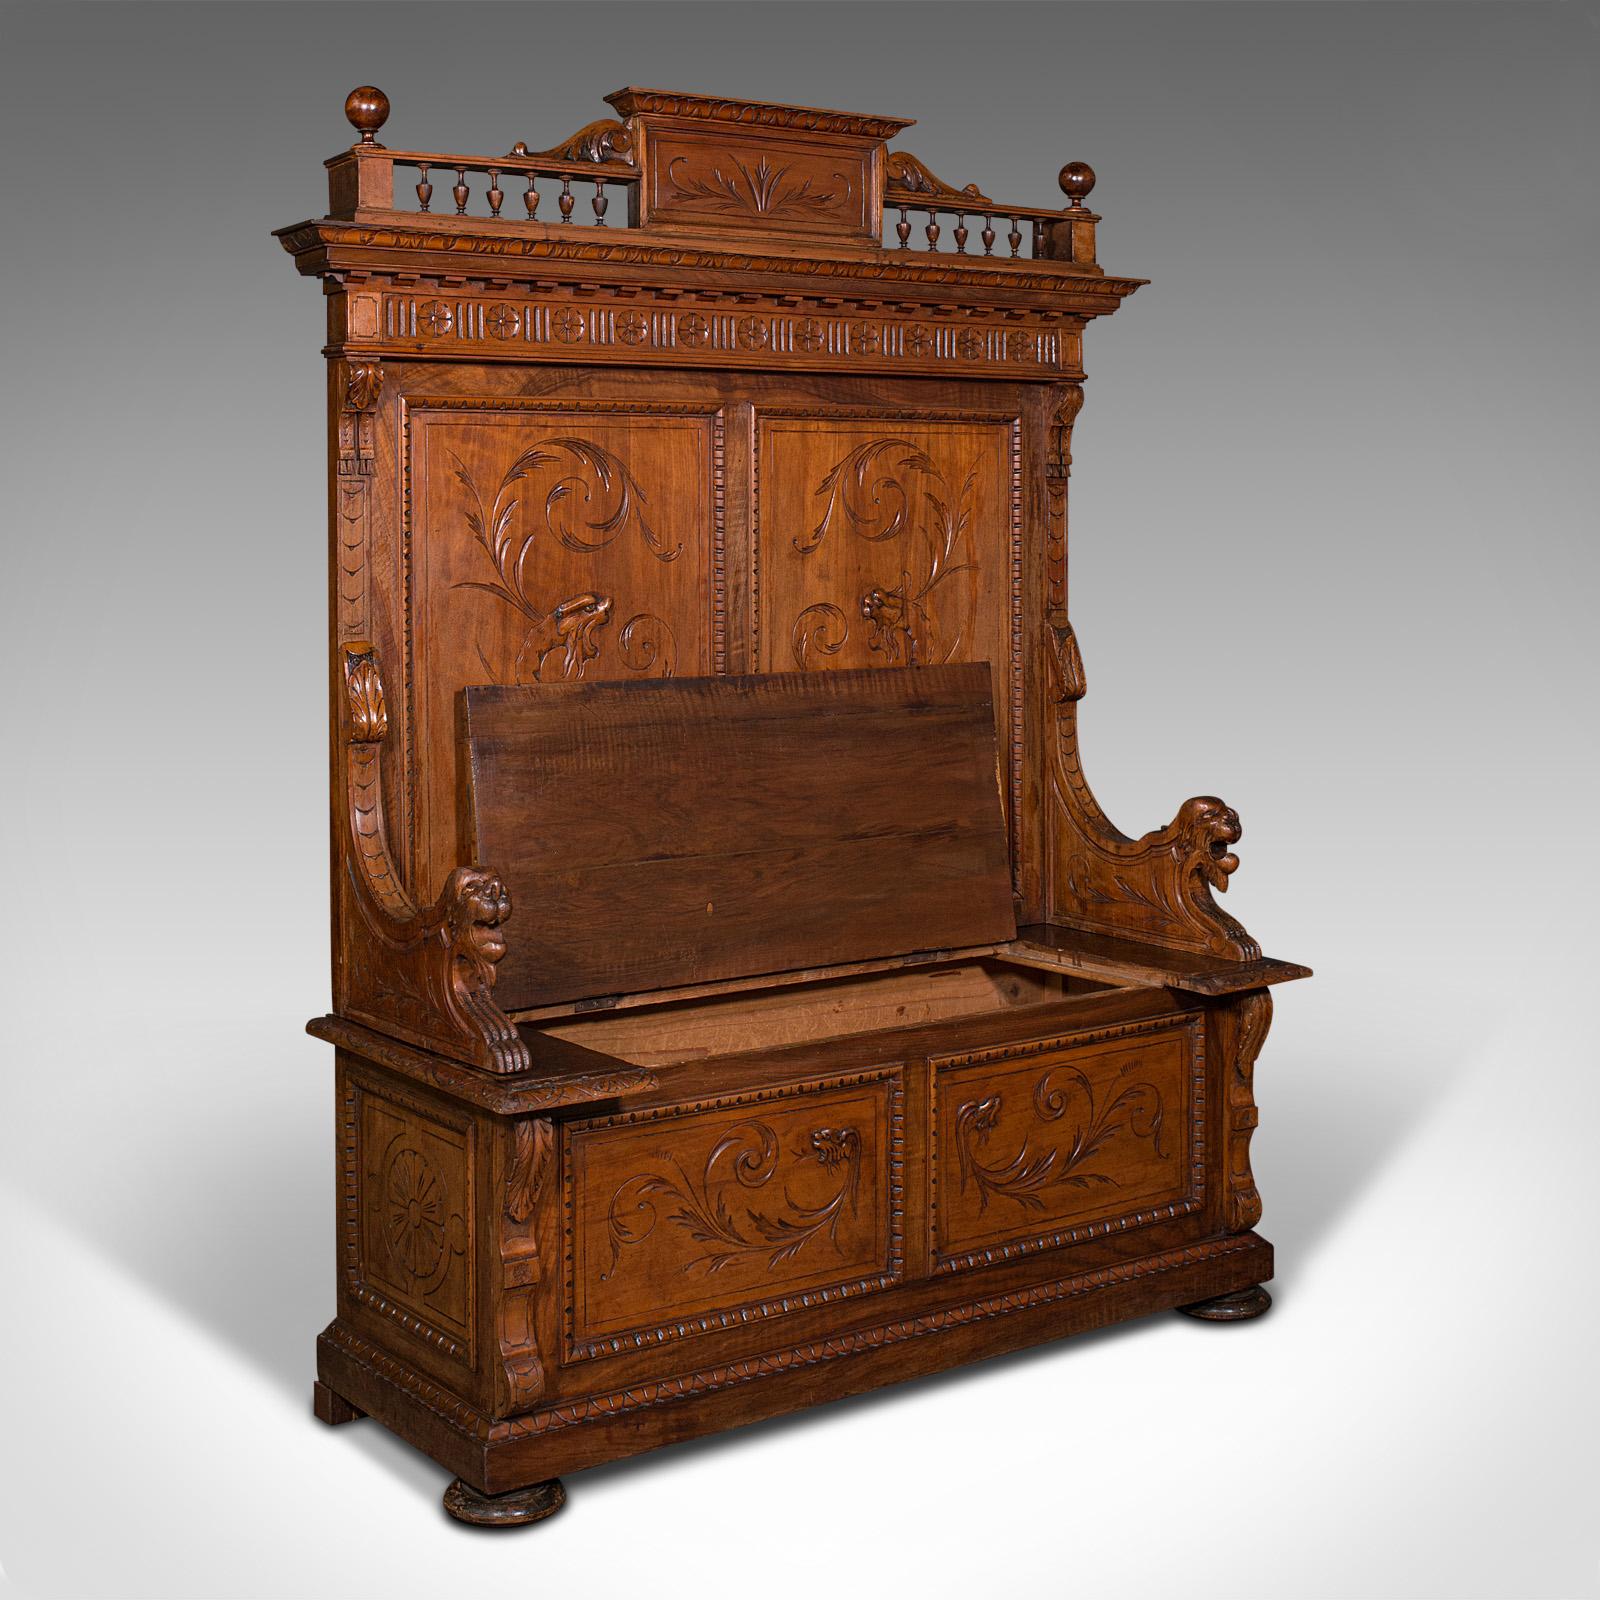 This is a large antique hall settle. An Italian, pine and walnut bench or pew with Oriental taste, dating to the early Victorian period, circa 1850.

Imposing in proportion and carved detail, ideal for the grand reception hall
Displays a